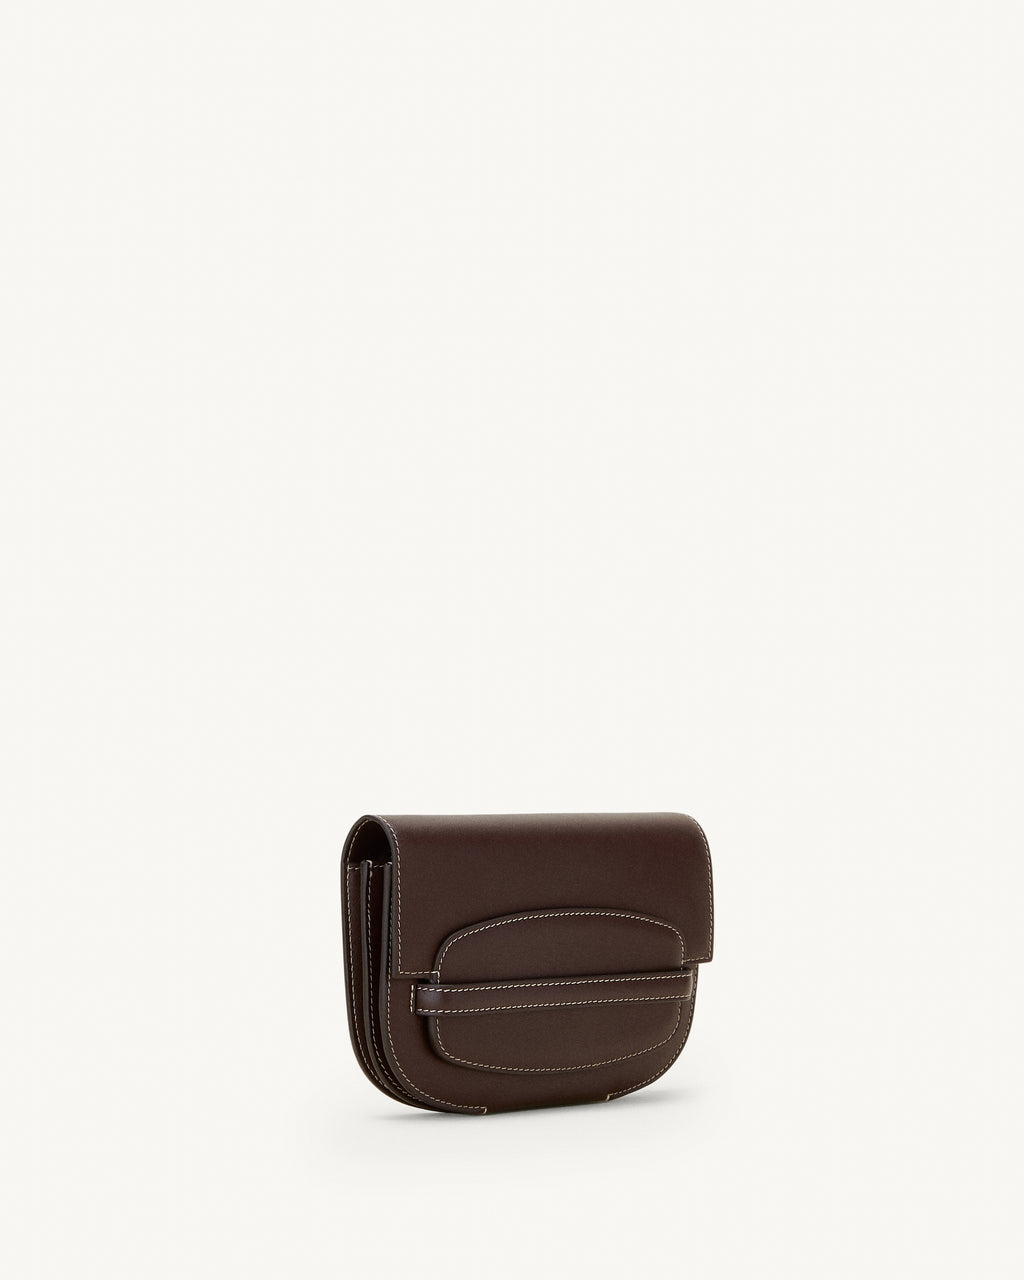 Sport Convertible Clutch in Coffee Leather